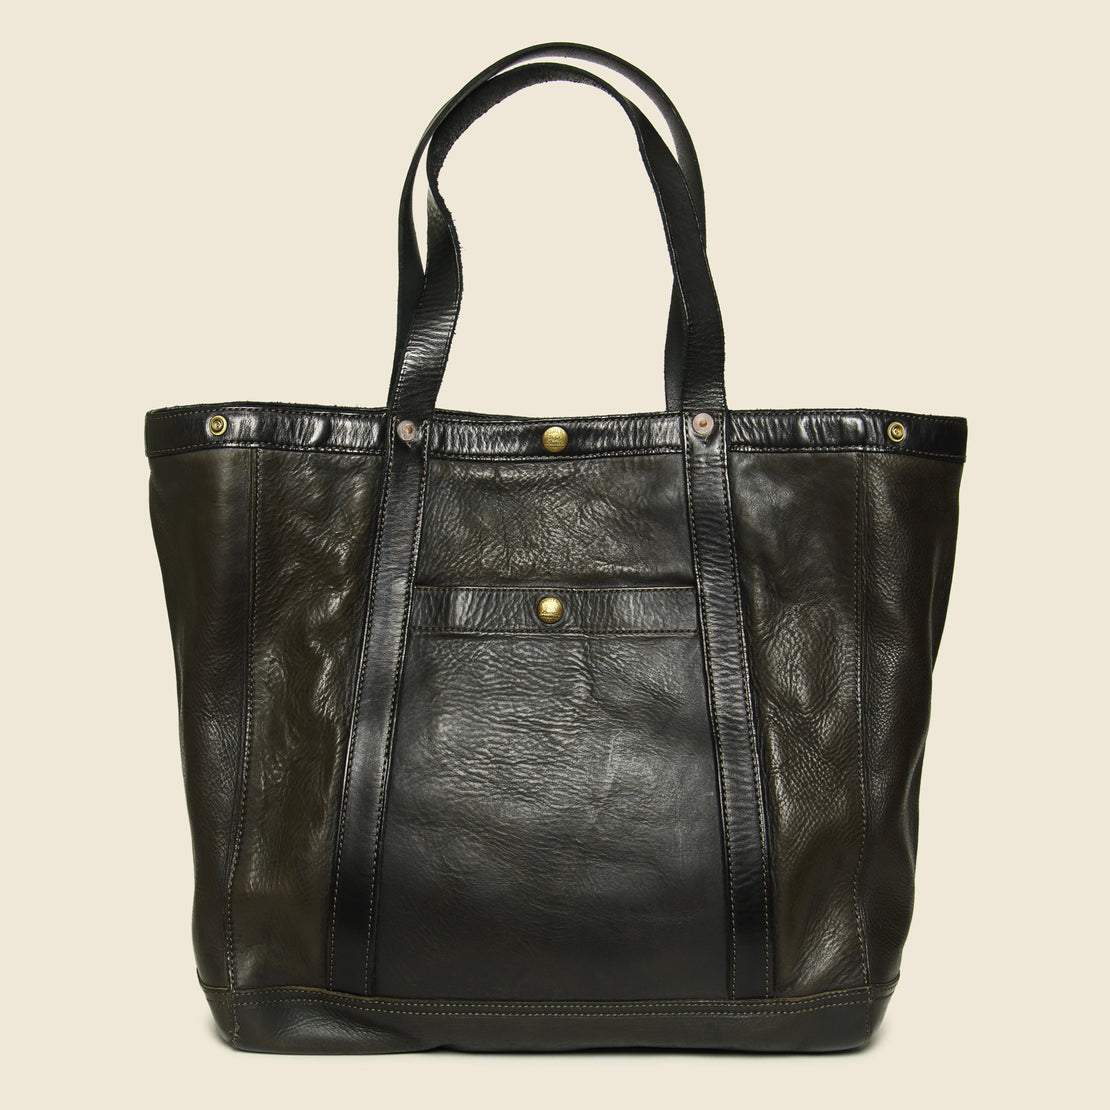 Leather Harris Tote Bag - Vintage Black - RRL - STAG Provisions - Accessories - Bags / Luggage